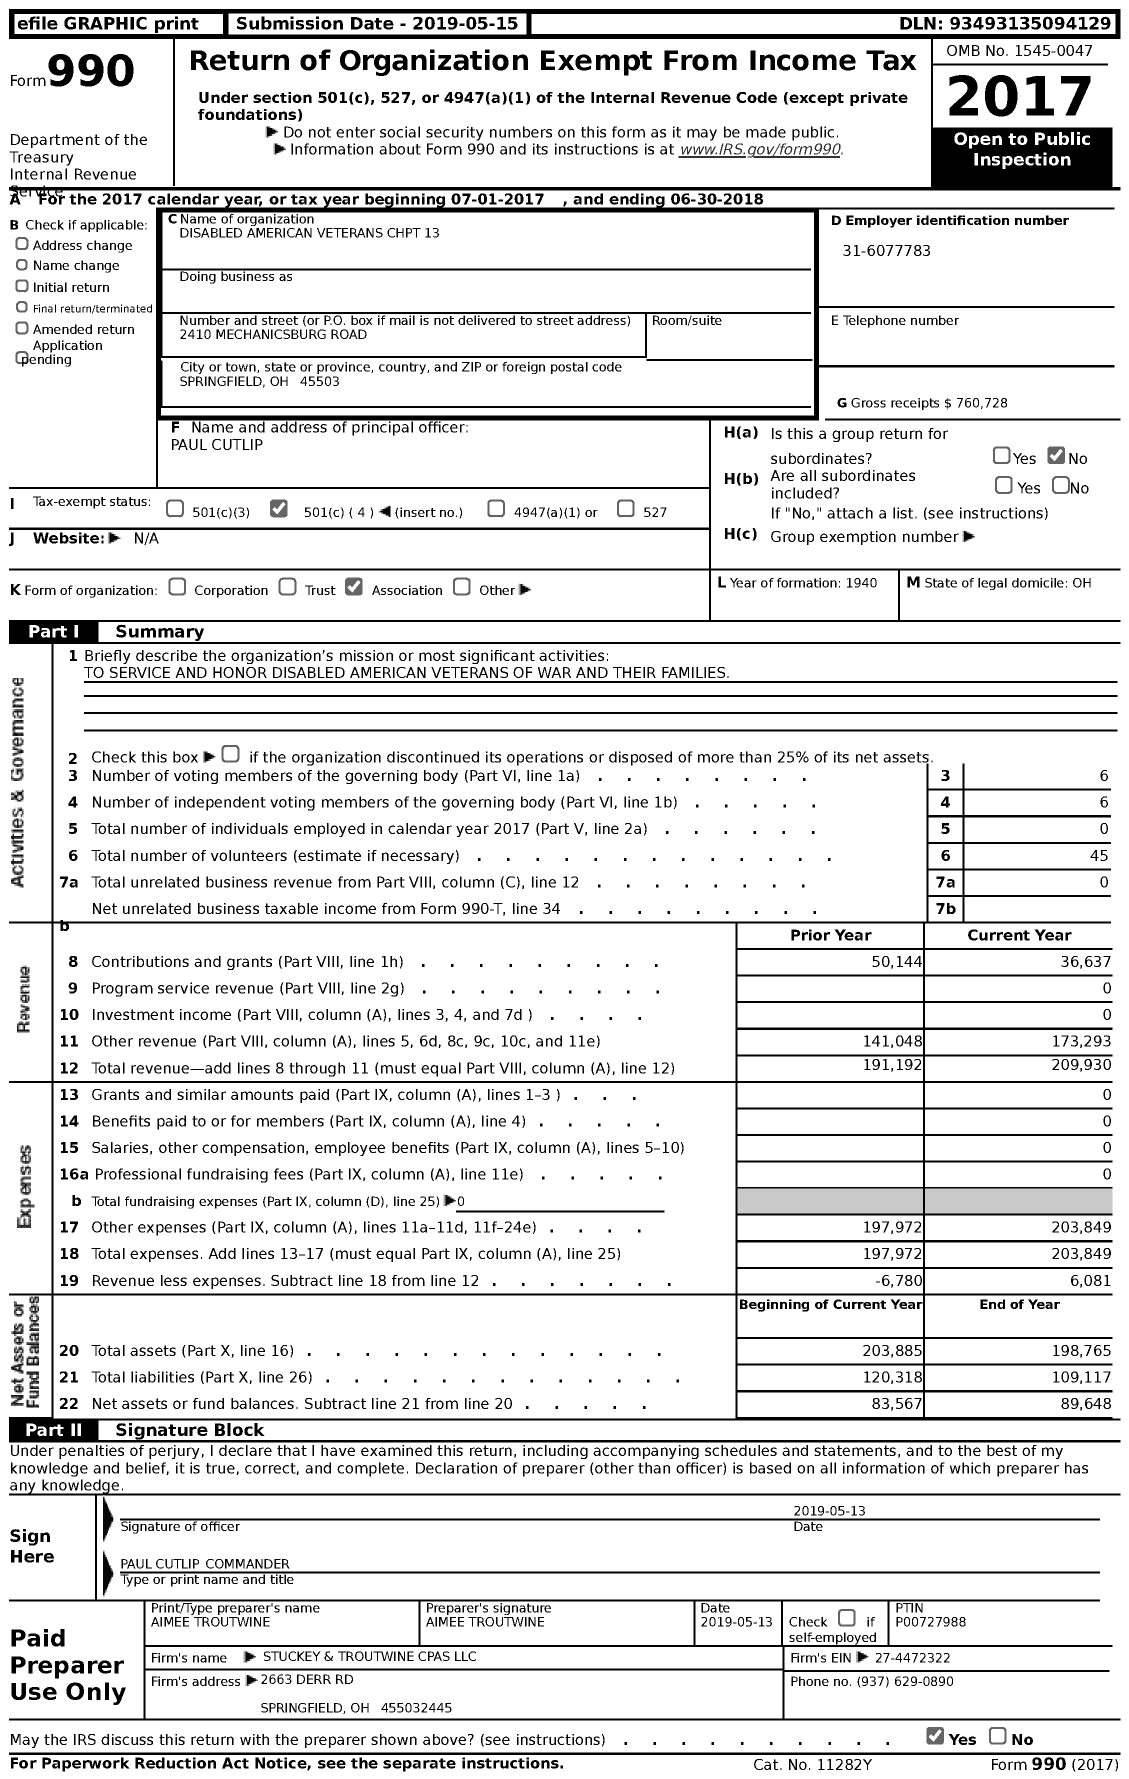 Image of first page of 2017 Form 990 for Disabled American Veterans CHPT 13